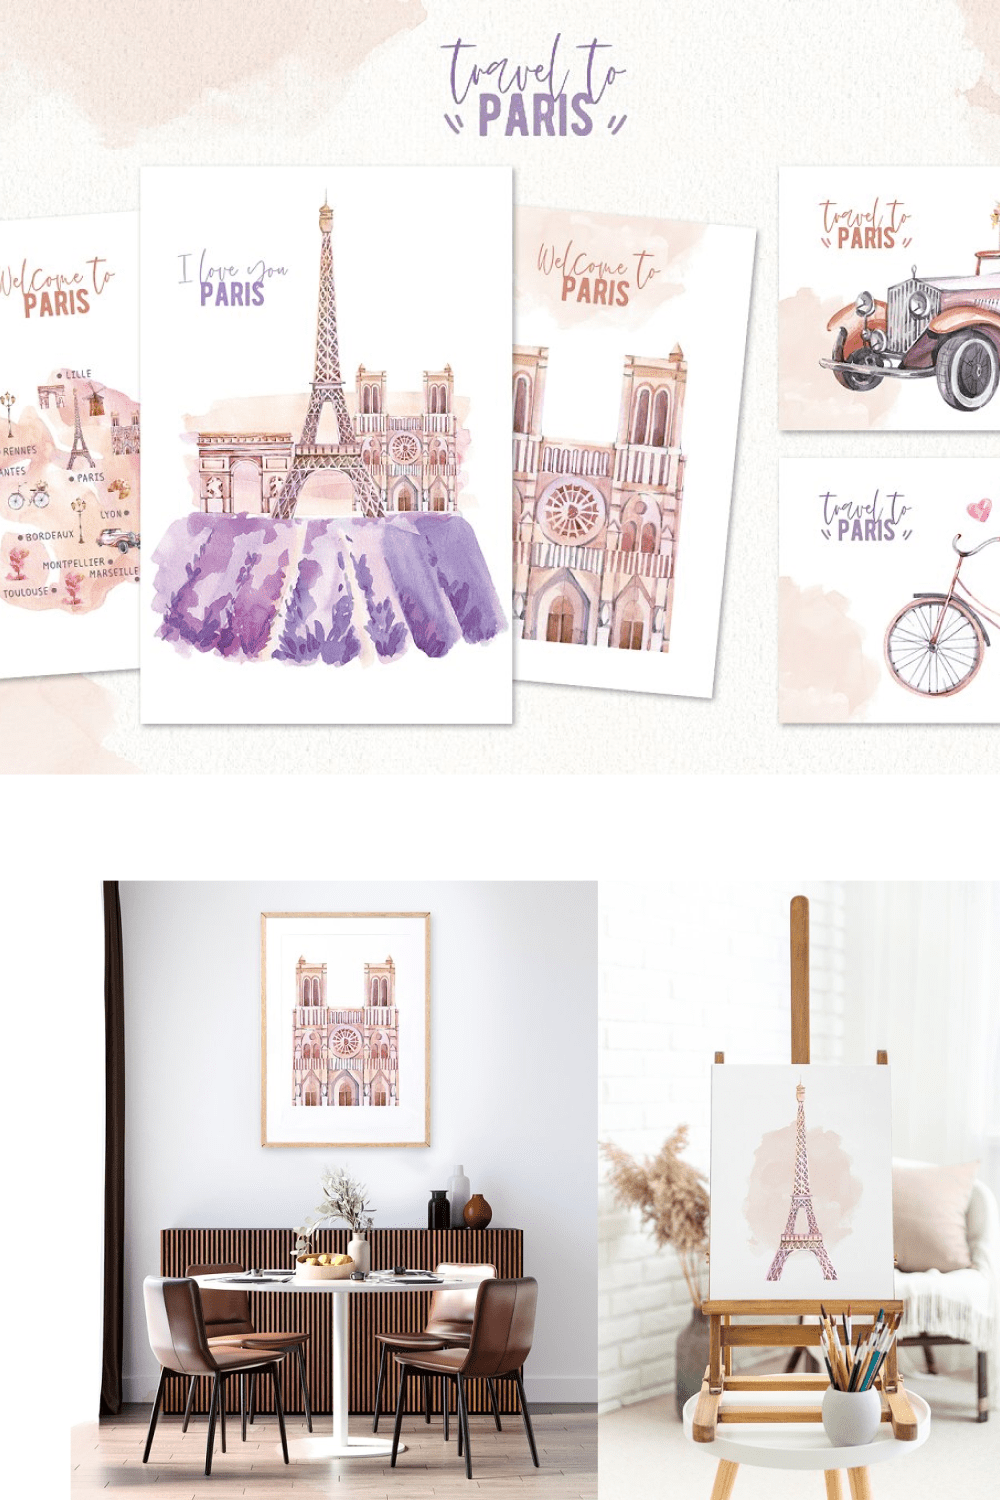 Travel To Paris Watercolor Clipart pin2.